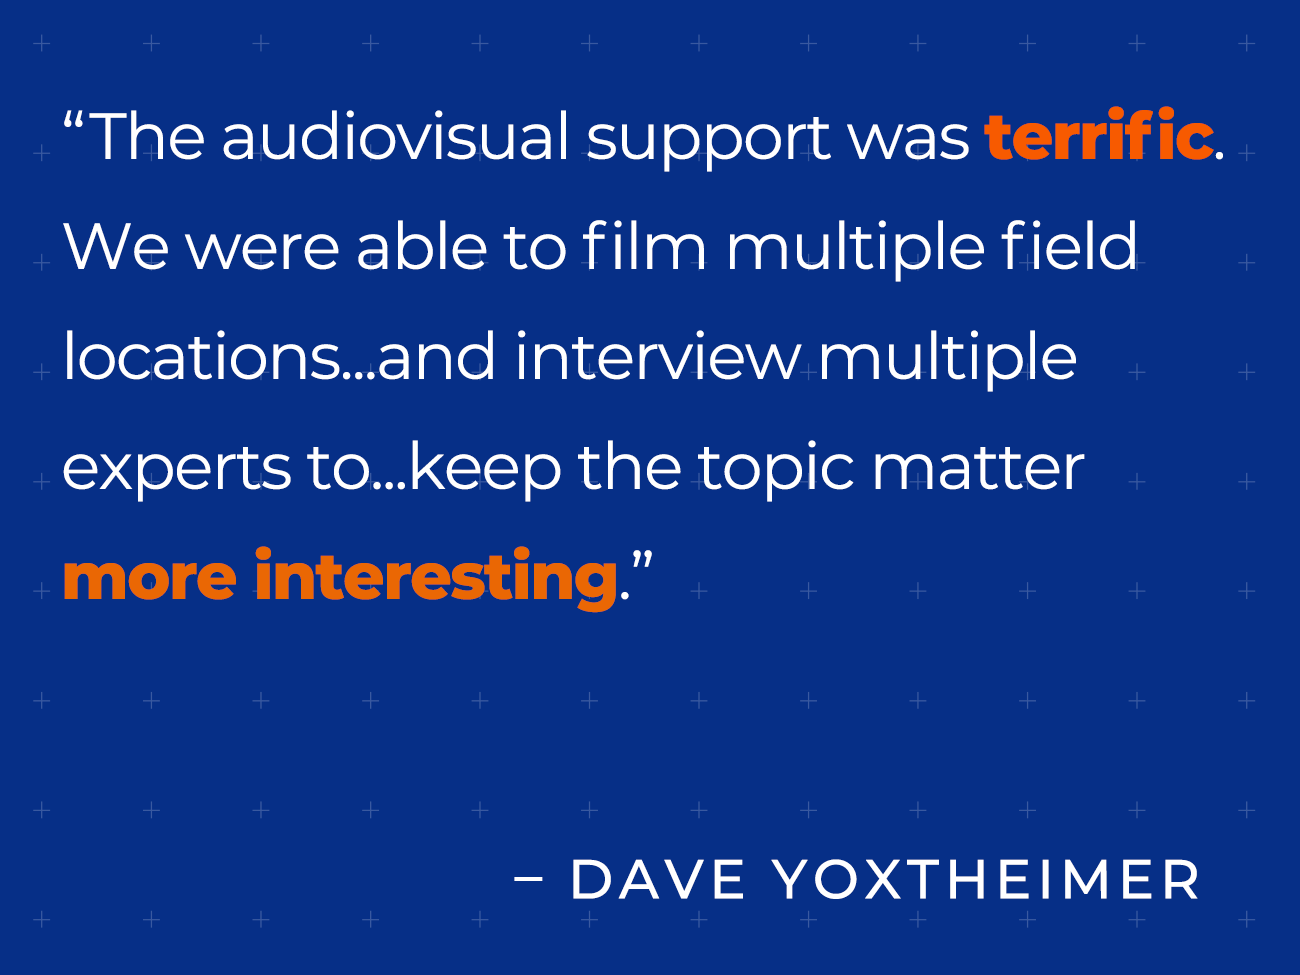 The audiovisual support was terrific. We were able to film multiple field locations ... and interview multiple experts to ... keep the topic matter more interesting. - David Yoxtheimer